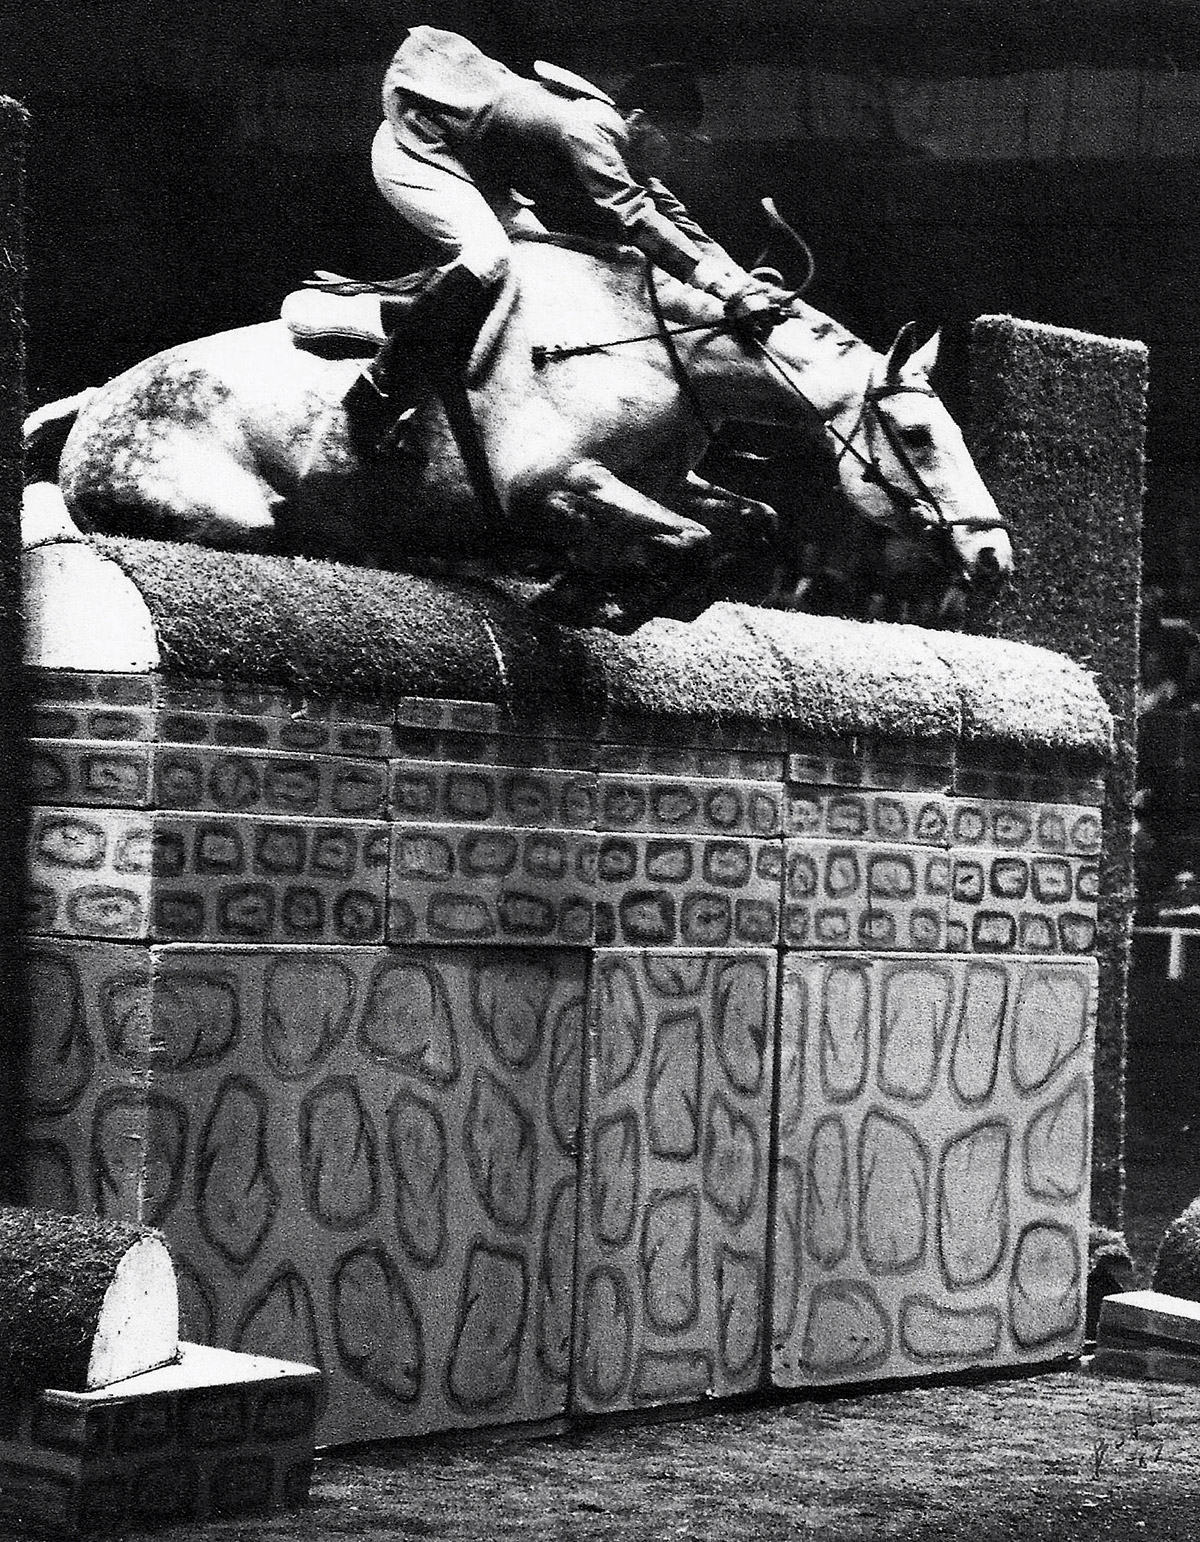 Bill Steinkraus riding Bold Minstrel in the International Puissance at the National Horse Show in 1967.